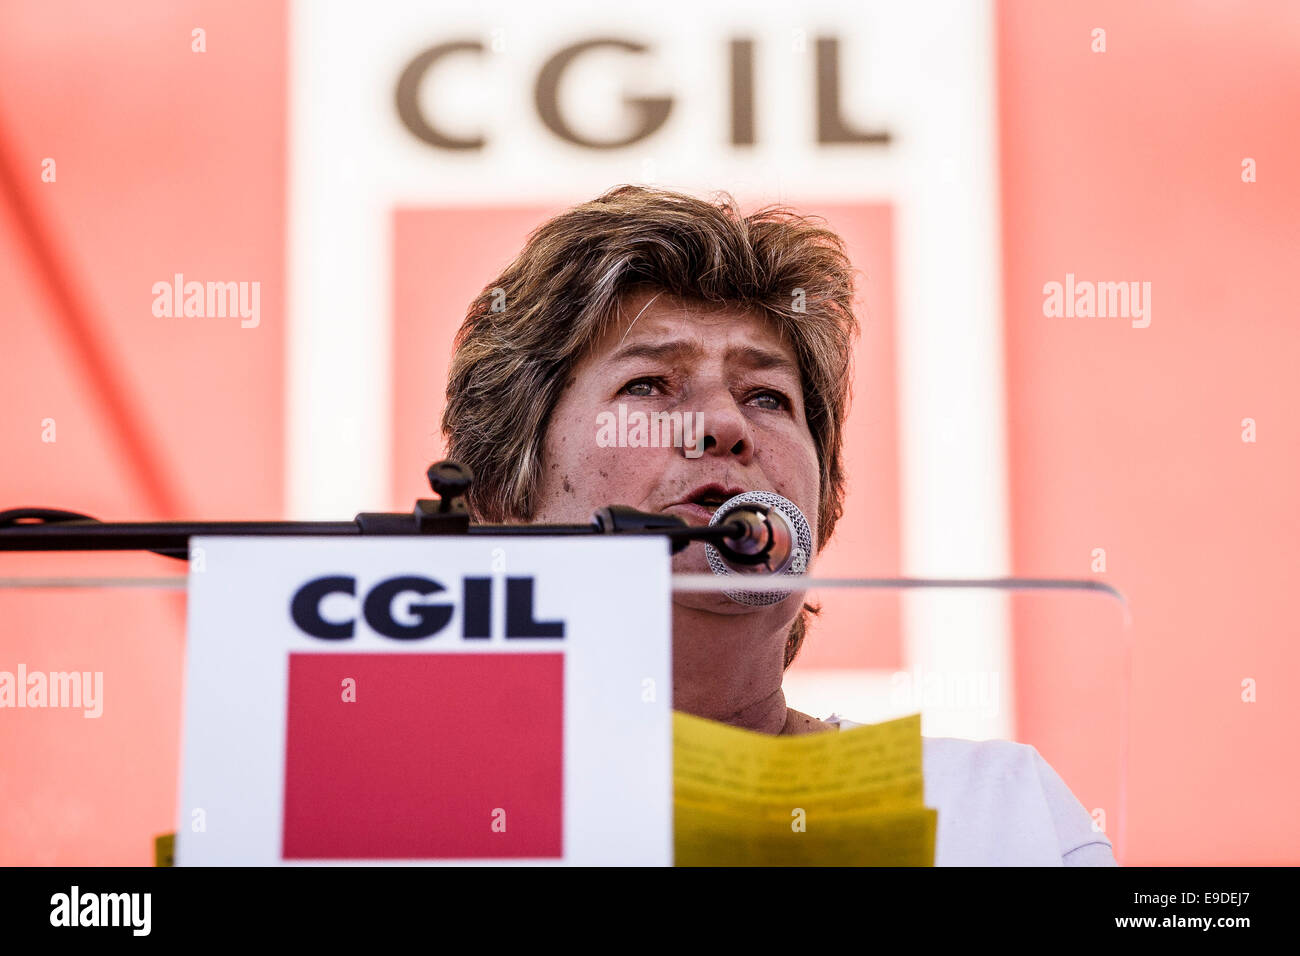 Rome, Italy. 25th Oct, 2014. Susanna Camusso, General Secretary of the CGIL labor union federation, arrives at a demonstration in Rome to protest against the Italian government's plans to overhaul labor market laws. CGIL, Italy's largest trade-union federation, call an anti-government rally in Rome to protest against labor reforms proposed by Italian Prime Minister Matteo Renzi to stimulate the economy by changing employment laws. (Photo by Giuseppe Ciccia / Pacific Press) Credit:  PACIFIC PRESS/Alamy Live News Stock Photo